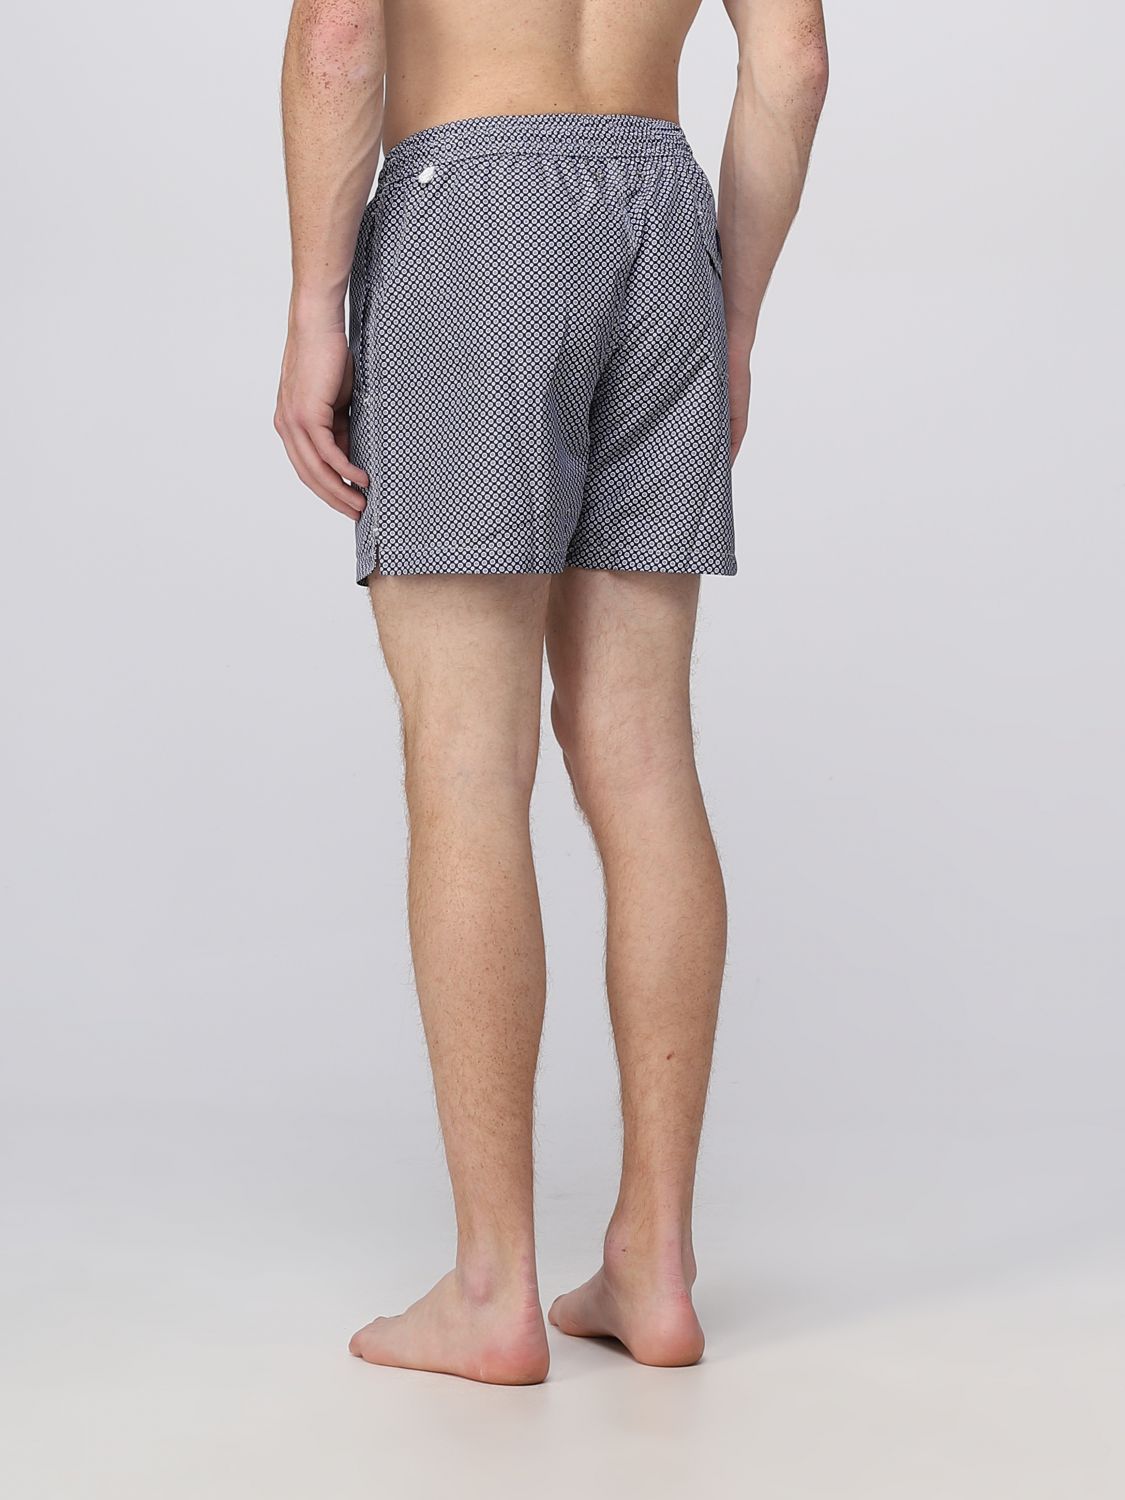 Bagni Fiorio Outlet: swimsuit for man - Grey  Bagni Fiorio swimsuit  BXR35315 S9400522 online at